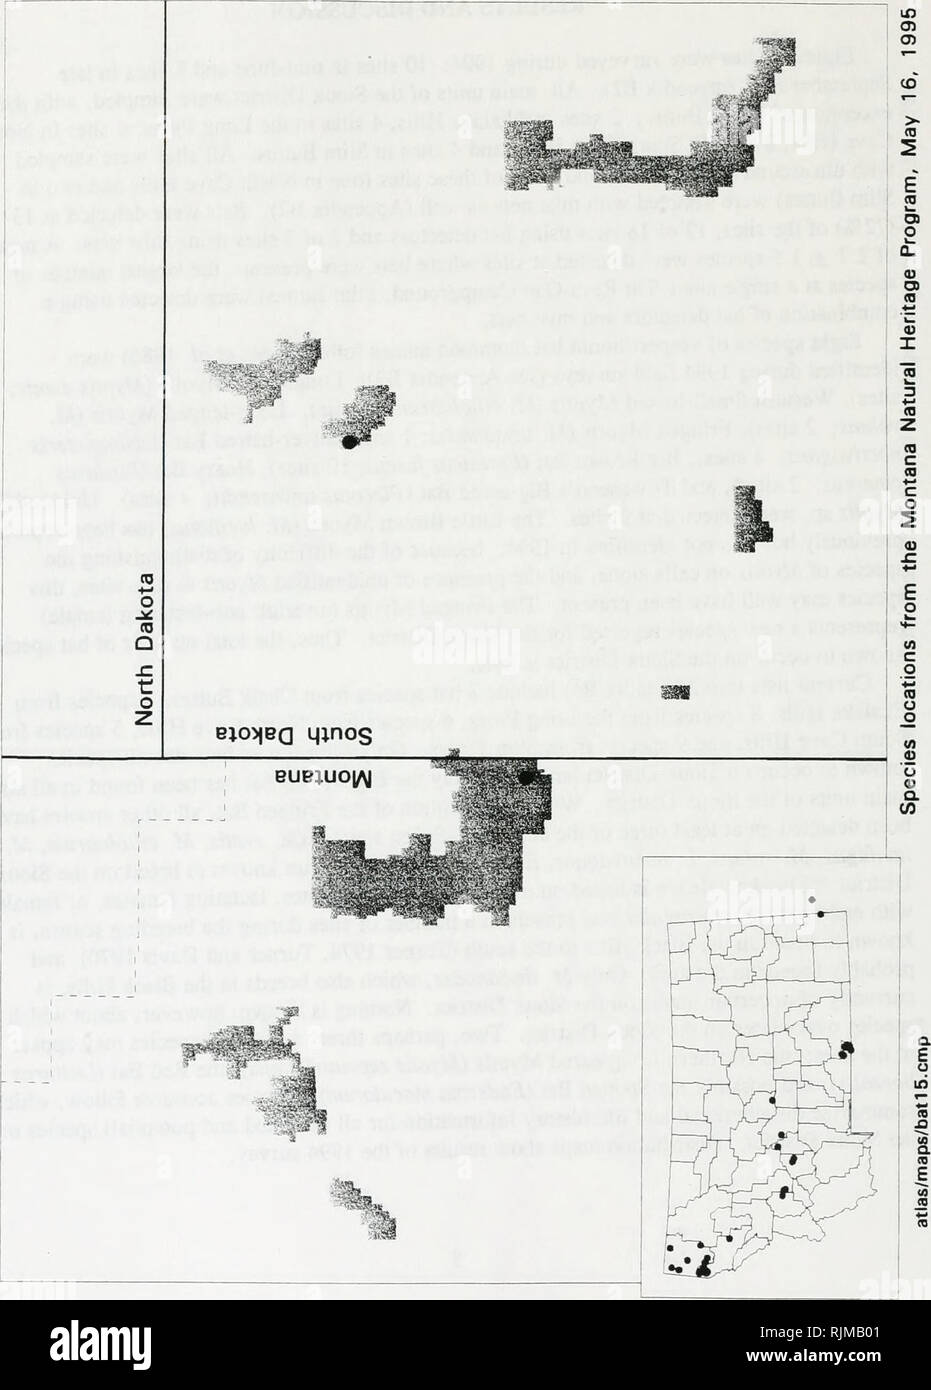 . Bat survey of the Sioux District, Custer National Forest : 1994 . Bats; Bats; Bats; Bats; Anabat bat detection systems; Bats; Bats; Long-eared myotis; Long-eared myotis; Western small-footed myotis; Western small-footed myotis; Long-legged myotis; Long-legged myotis; Fringed myotis; Fringed myotis; Big brown bat; Big brown bat; Silver-haired bat; Silver-haired bat; Hoary bat; Hoary bat; Plecotus townsendii; Plecotus townsendii; Mist netting. +â Â» V) o c g &gt; Q X D O C/D (D to c c o W 'â M o (/) (1) o c &lt;n k  iâ D O o O. Please note that these images are extracted from scanned page imag Stock Photo